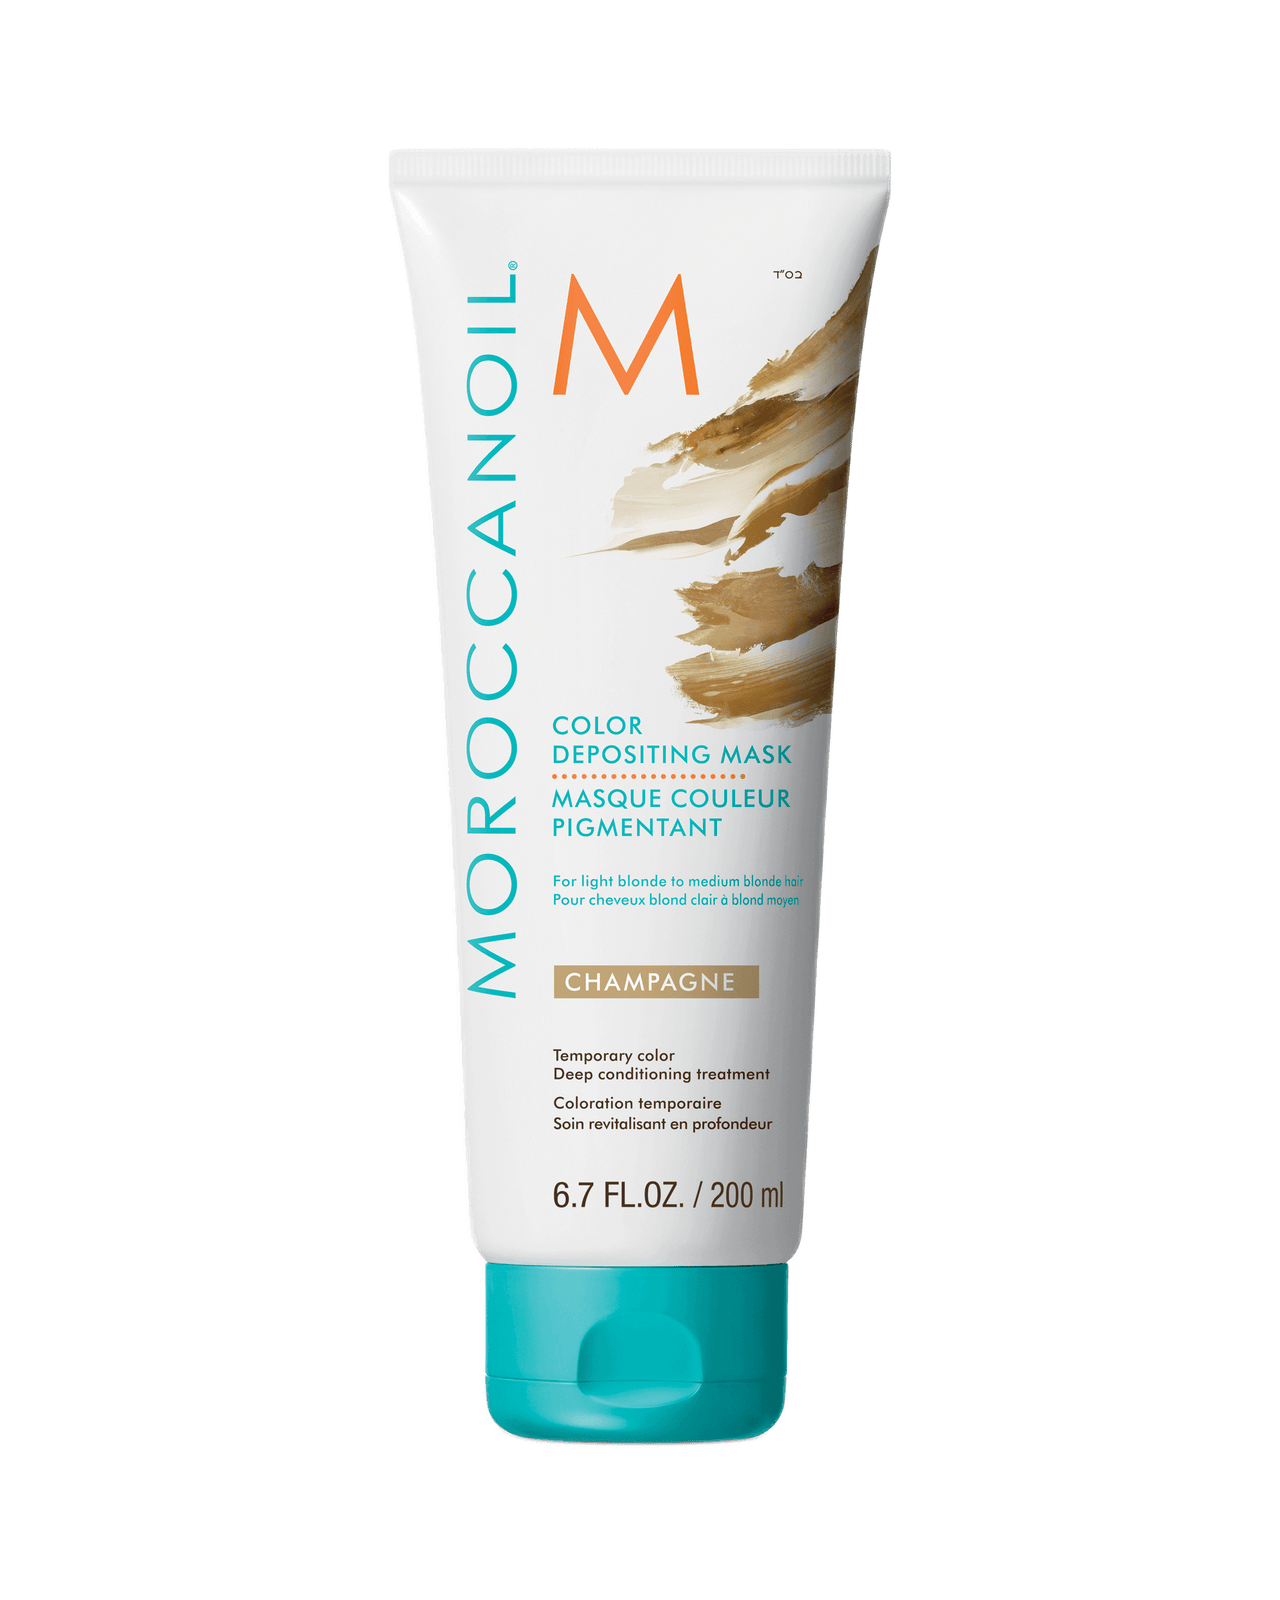 Moroccanoil Color Depositing Mask Champagne 200mL